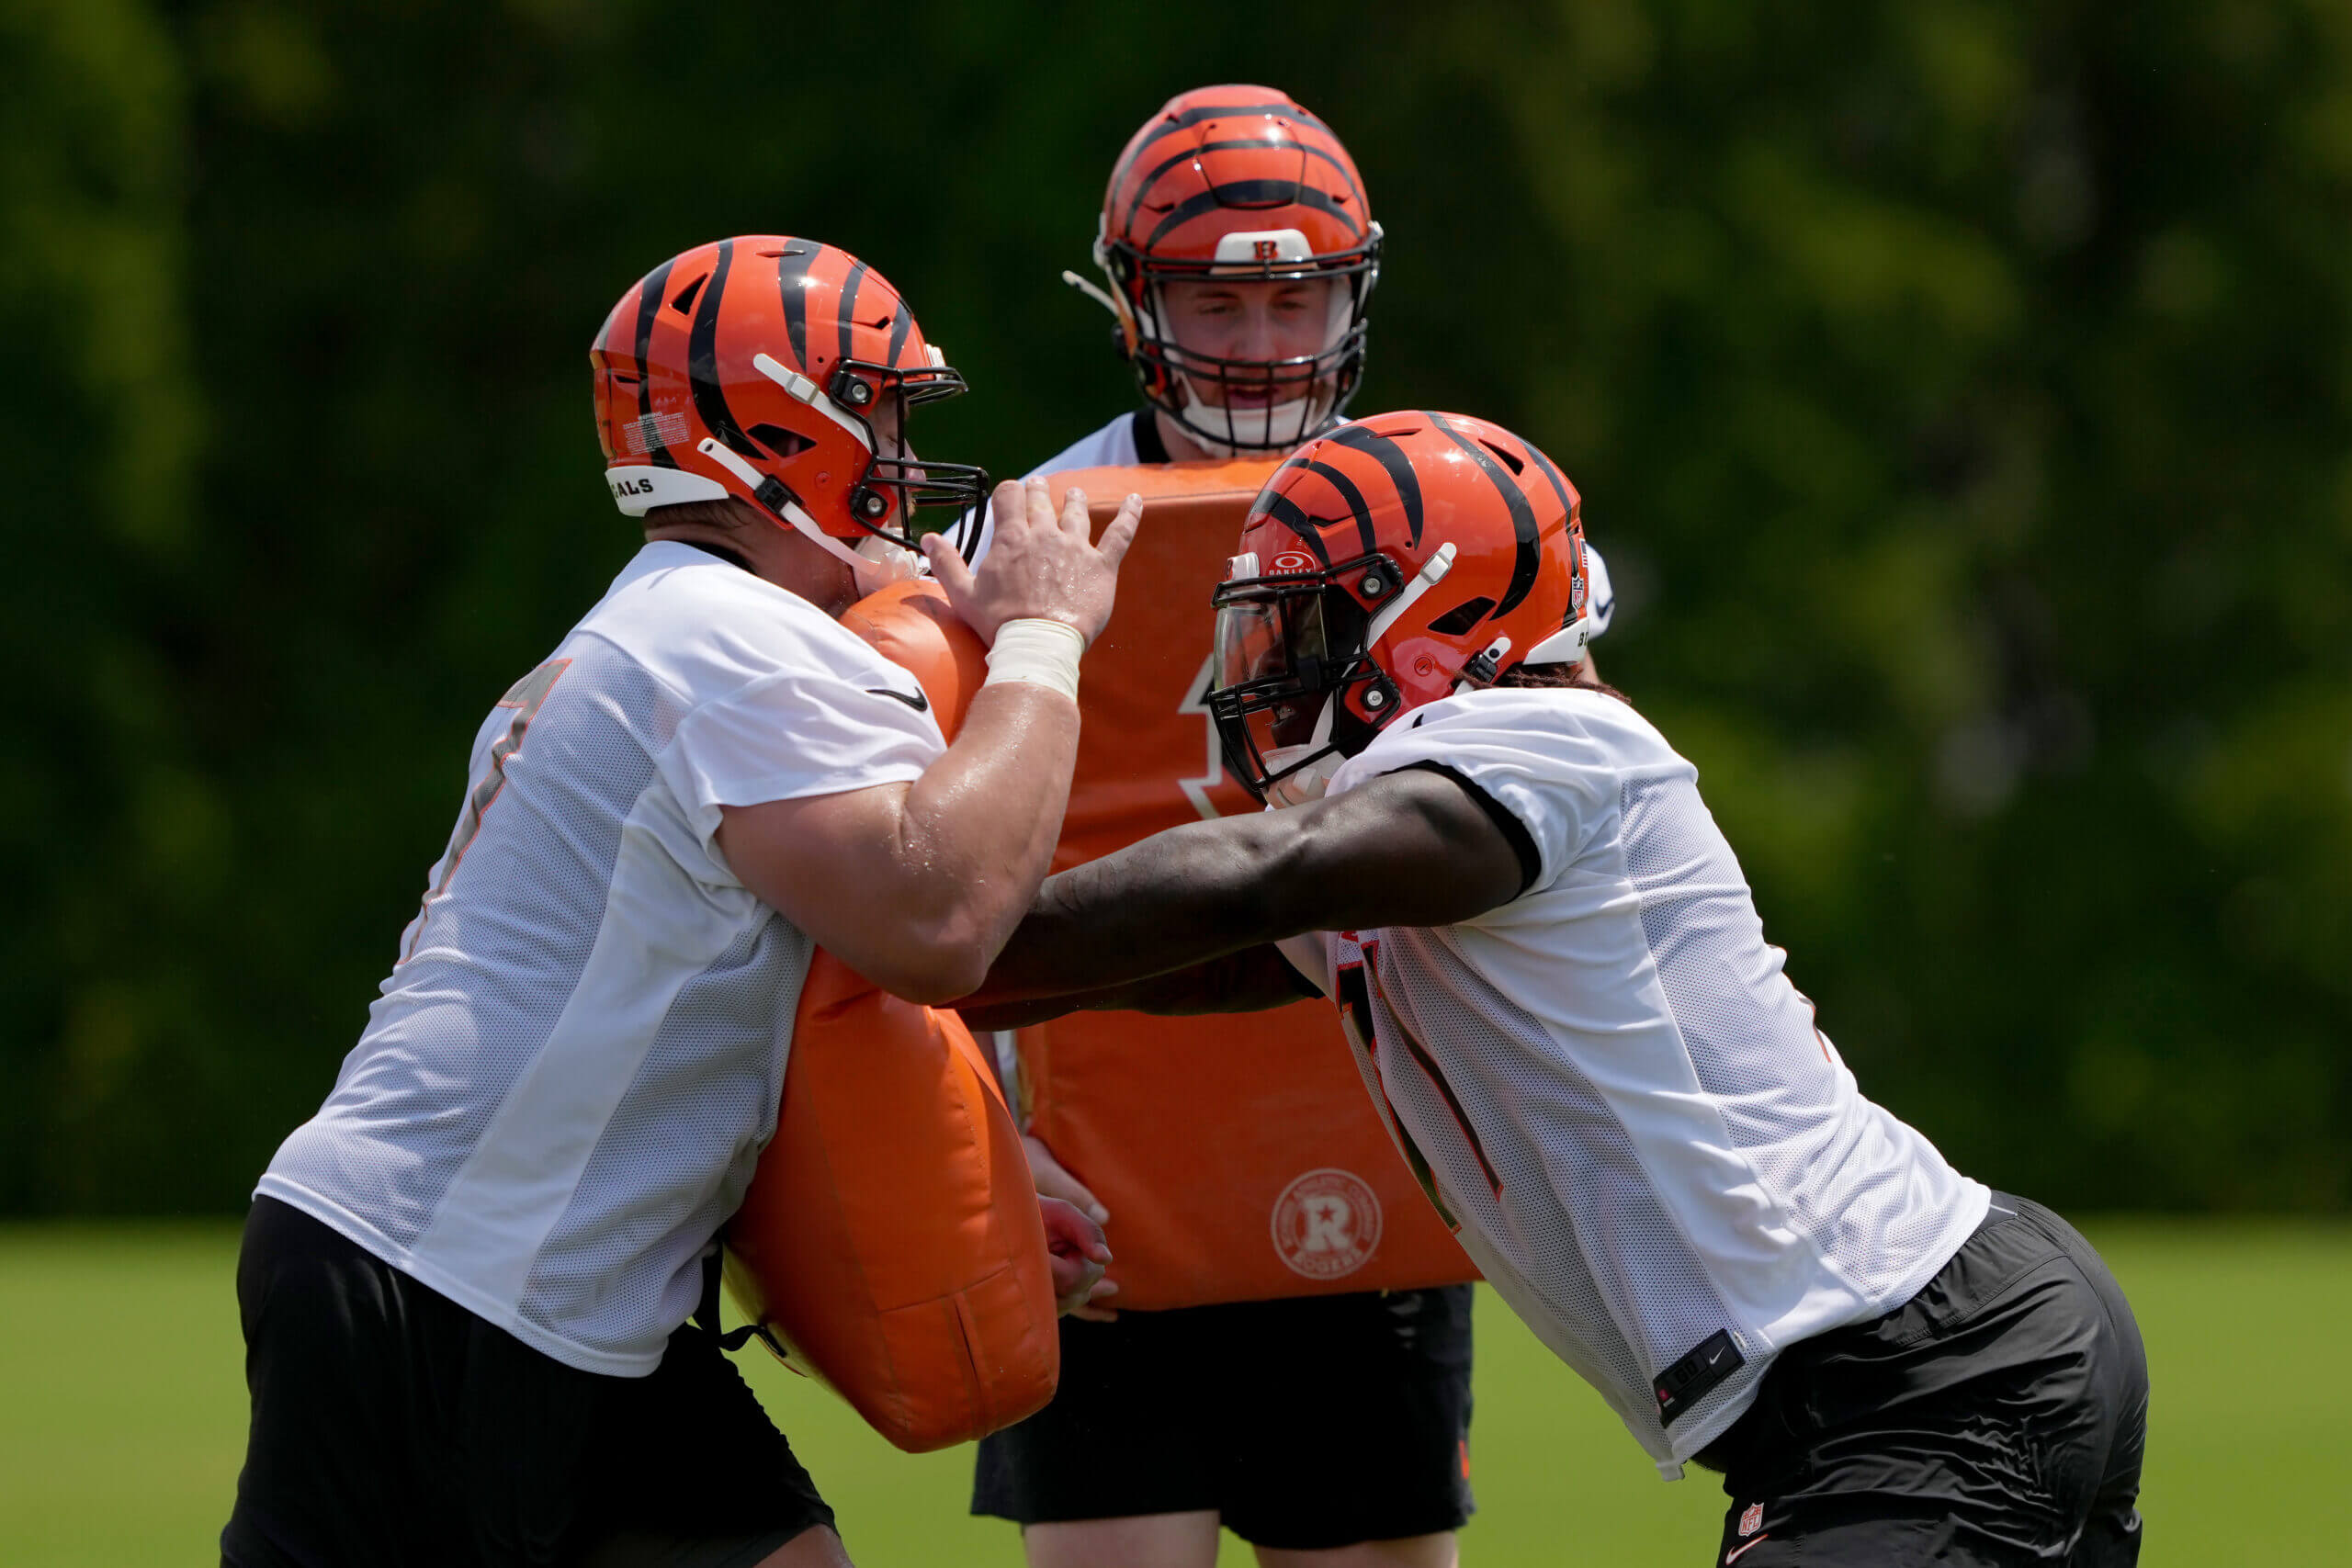 Bengals position group concern levels: Line tops offense's uncertainties